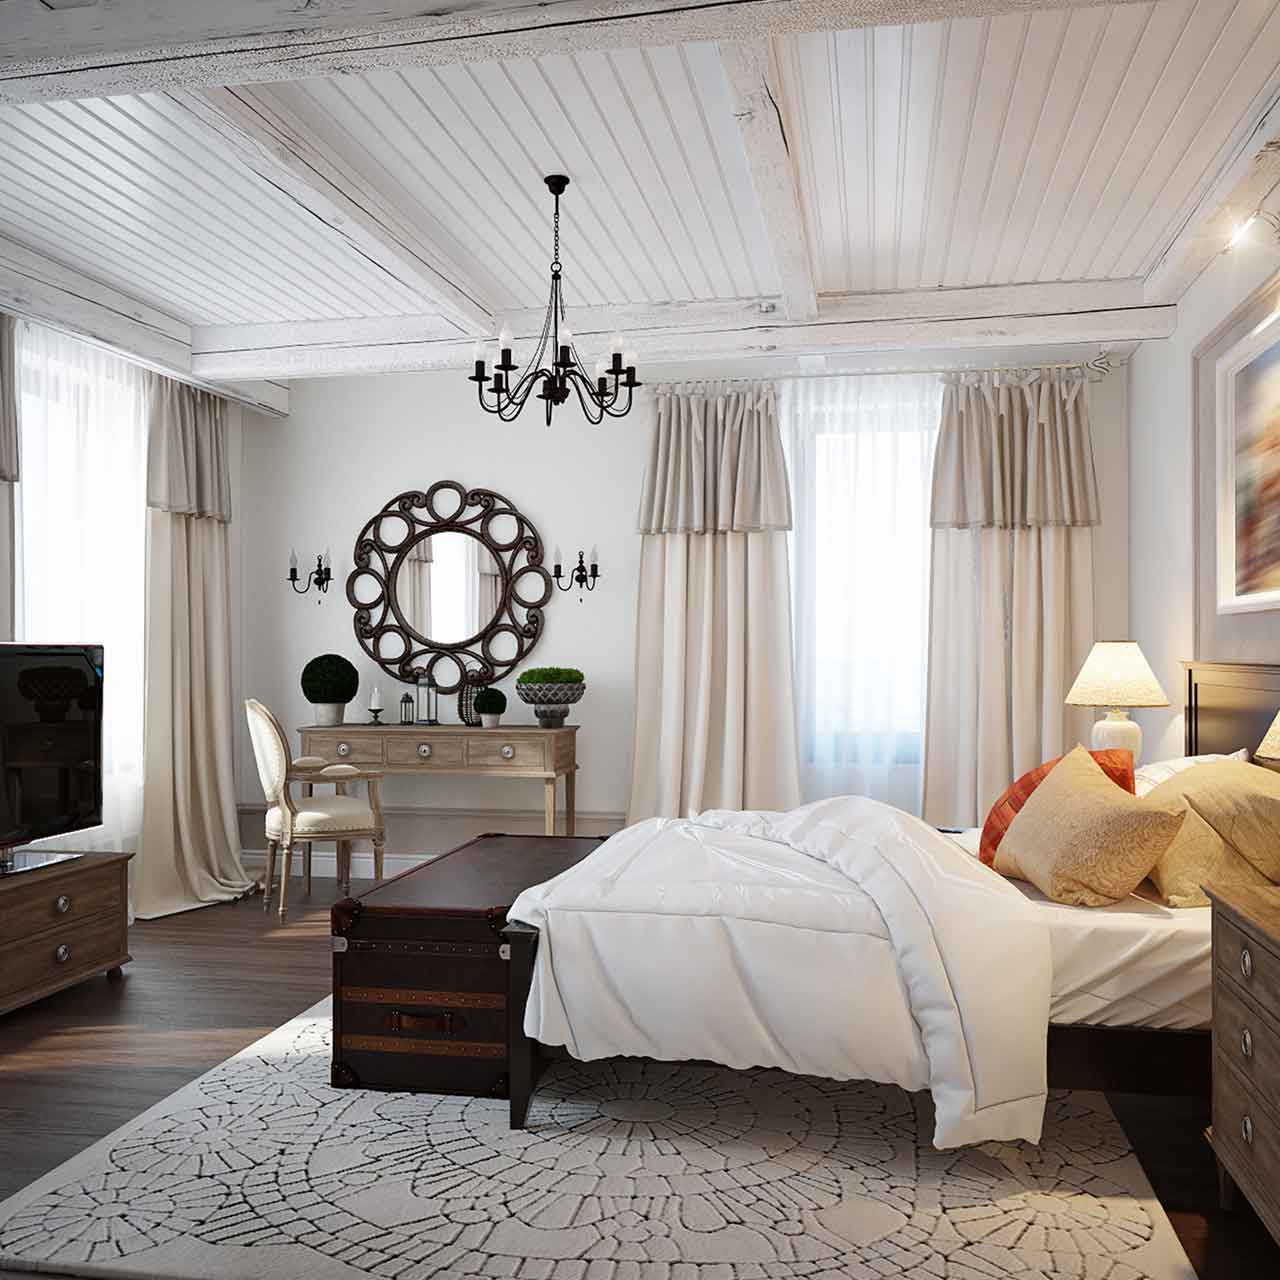 Mediterranean style bedroom interior design is a fusion of sophistication and elegance